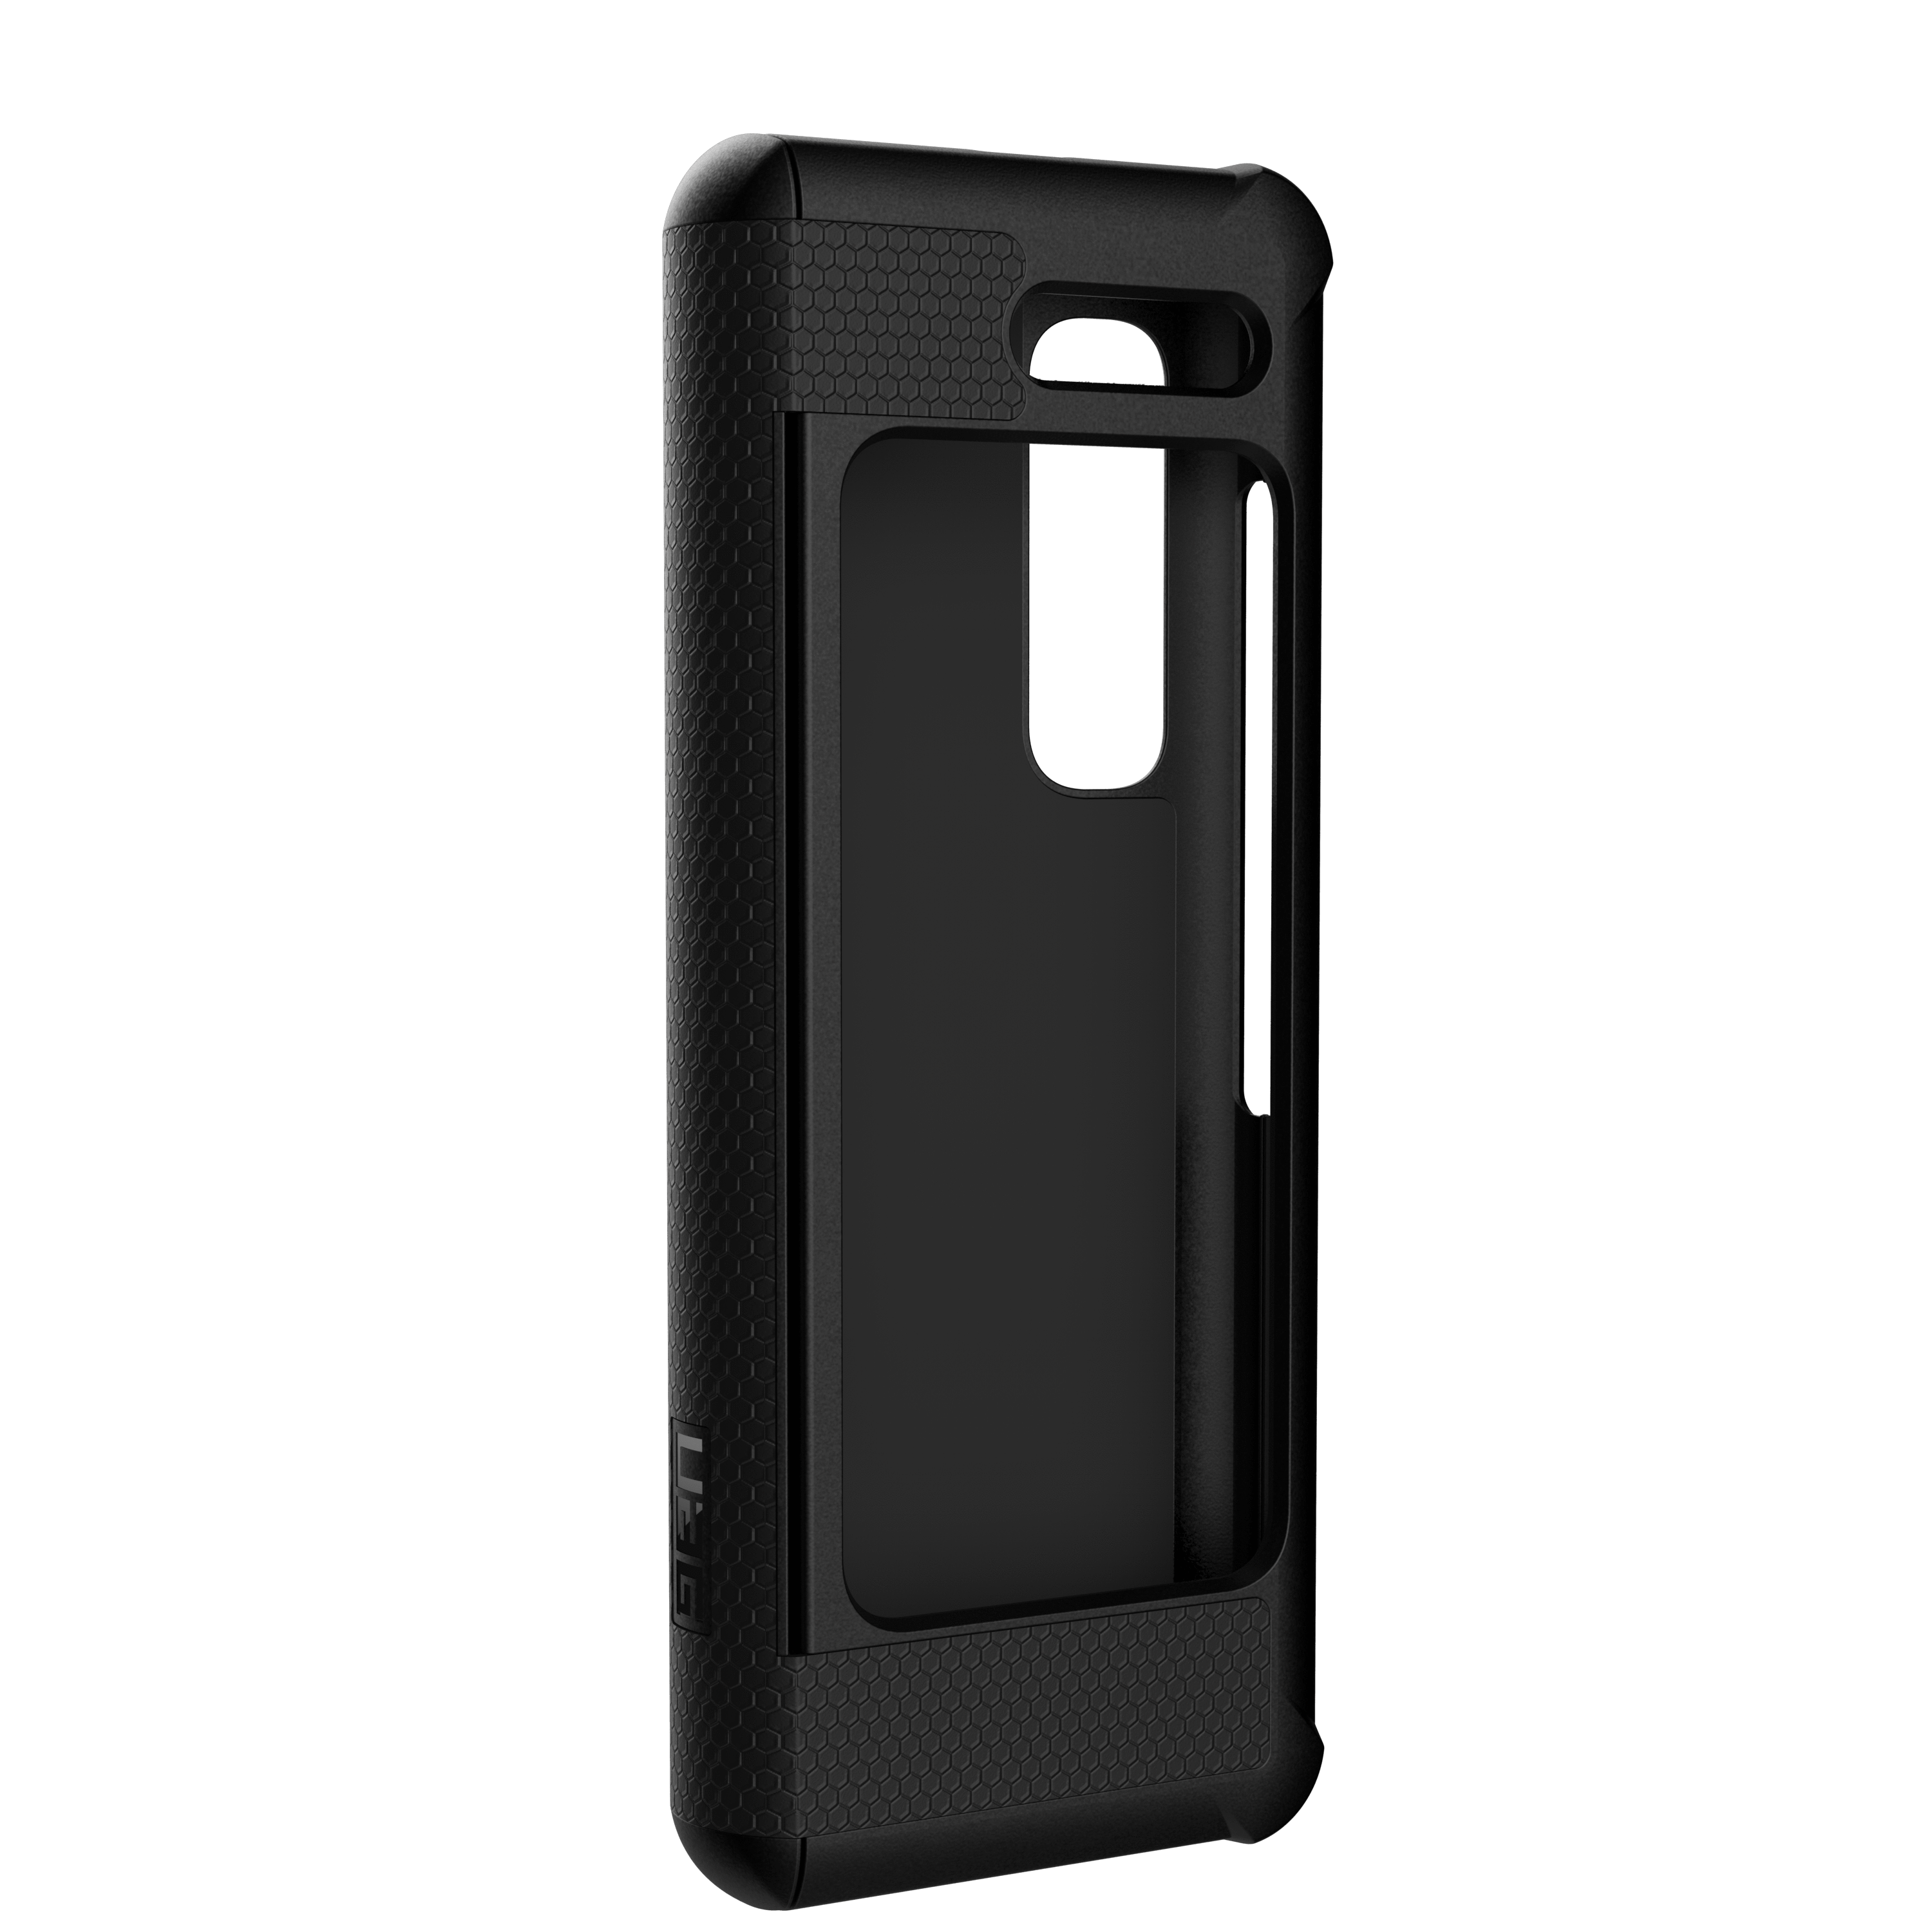 Rugged & Feather-light case for the Samsung Galaxy Fold by UAG | Urban ...